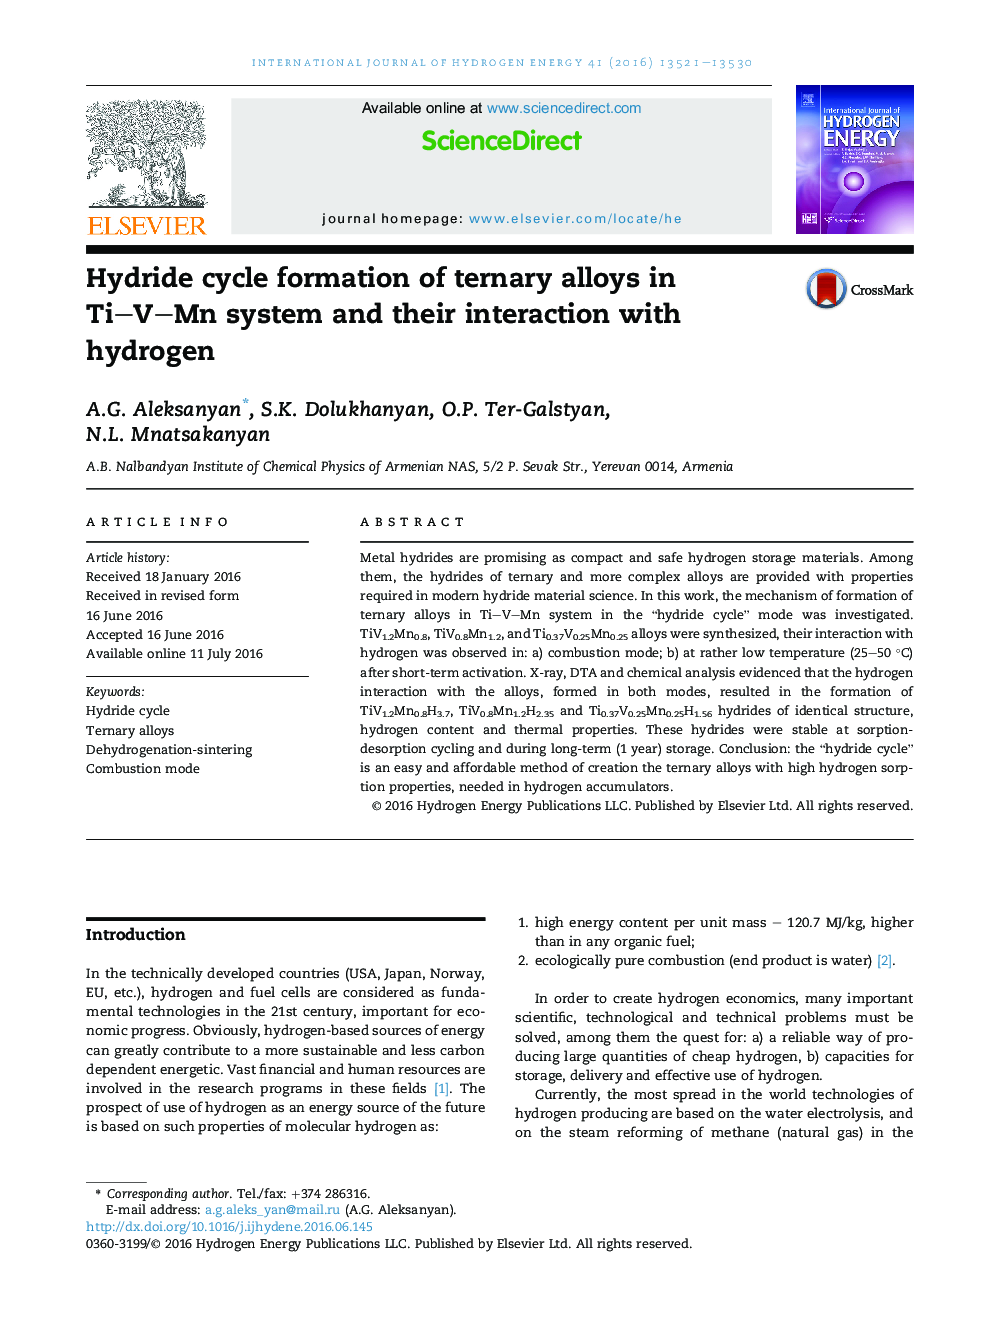 Hydride cycle formation of ternary alloys in TiVMn system and their interaction with hydrogen